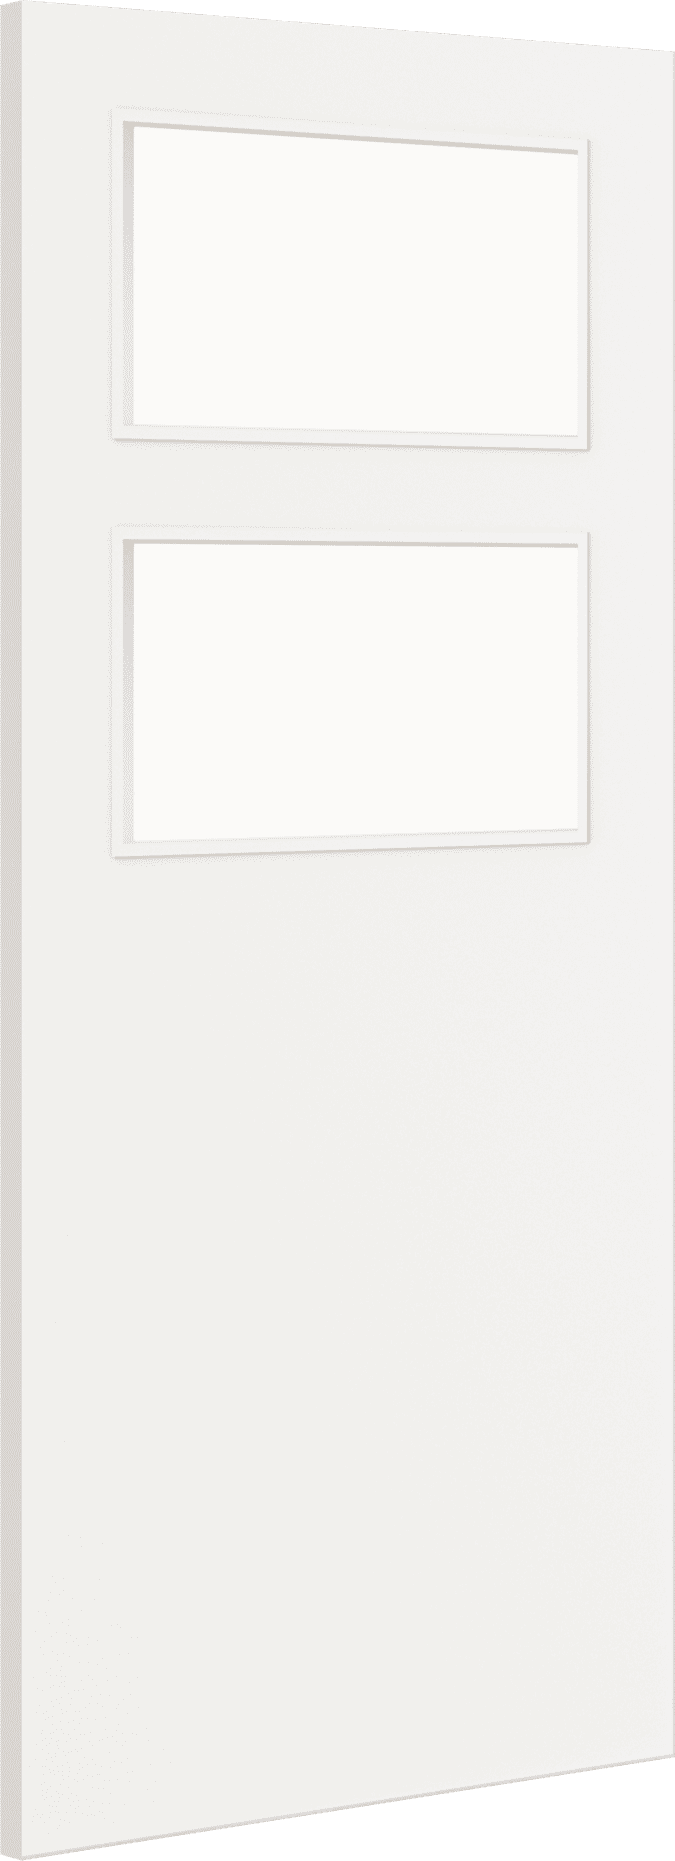 1981mm x 610mm x 44mm (24") Architectural Paint Grade White 02 Frosted Glazed Fire Door Blank